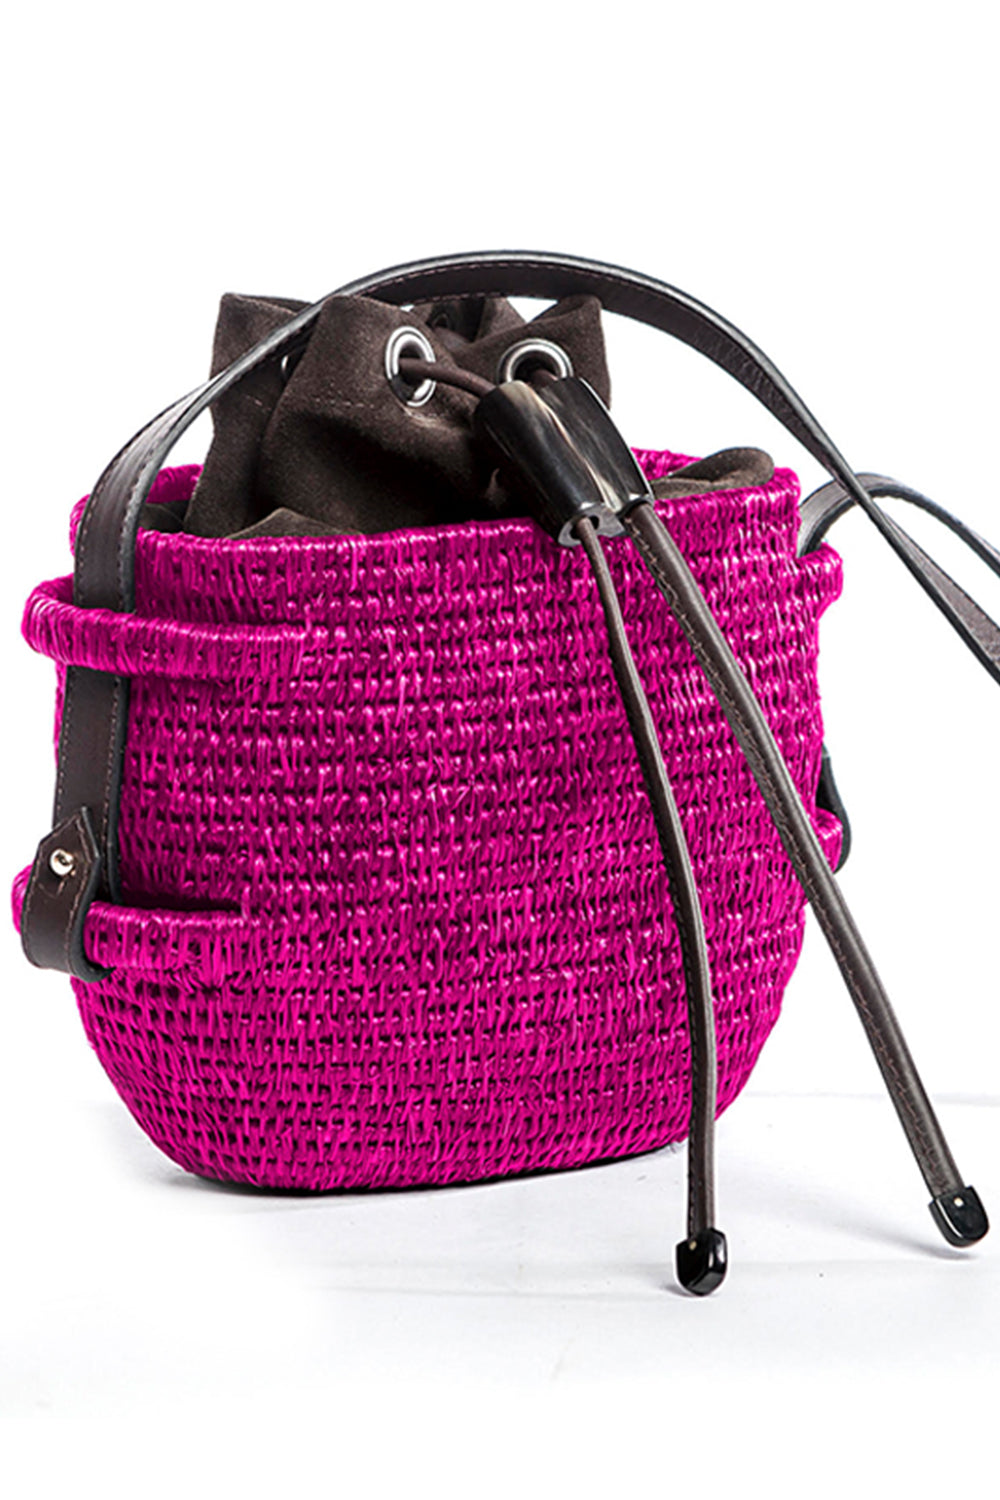 Khokho Thembi Bucket Bag in Hot Pink